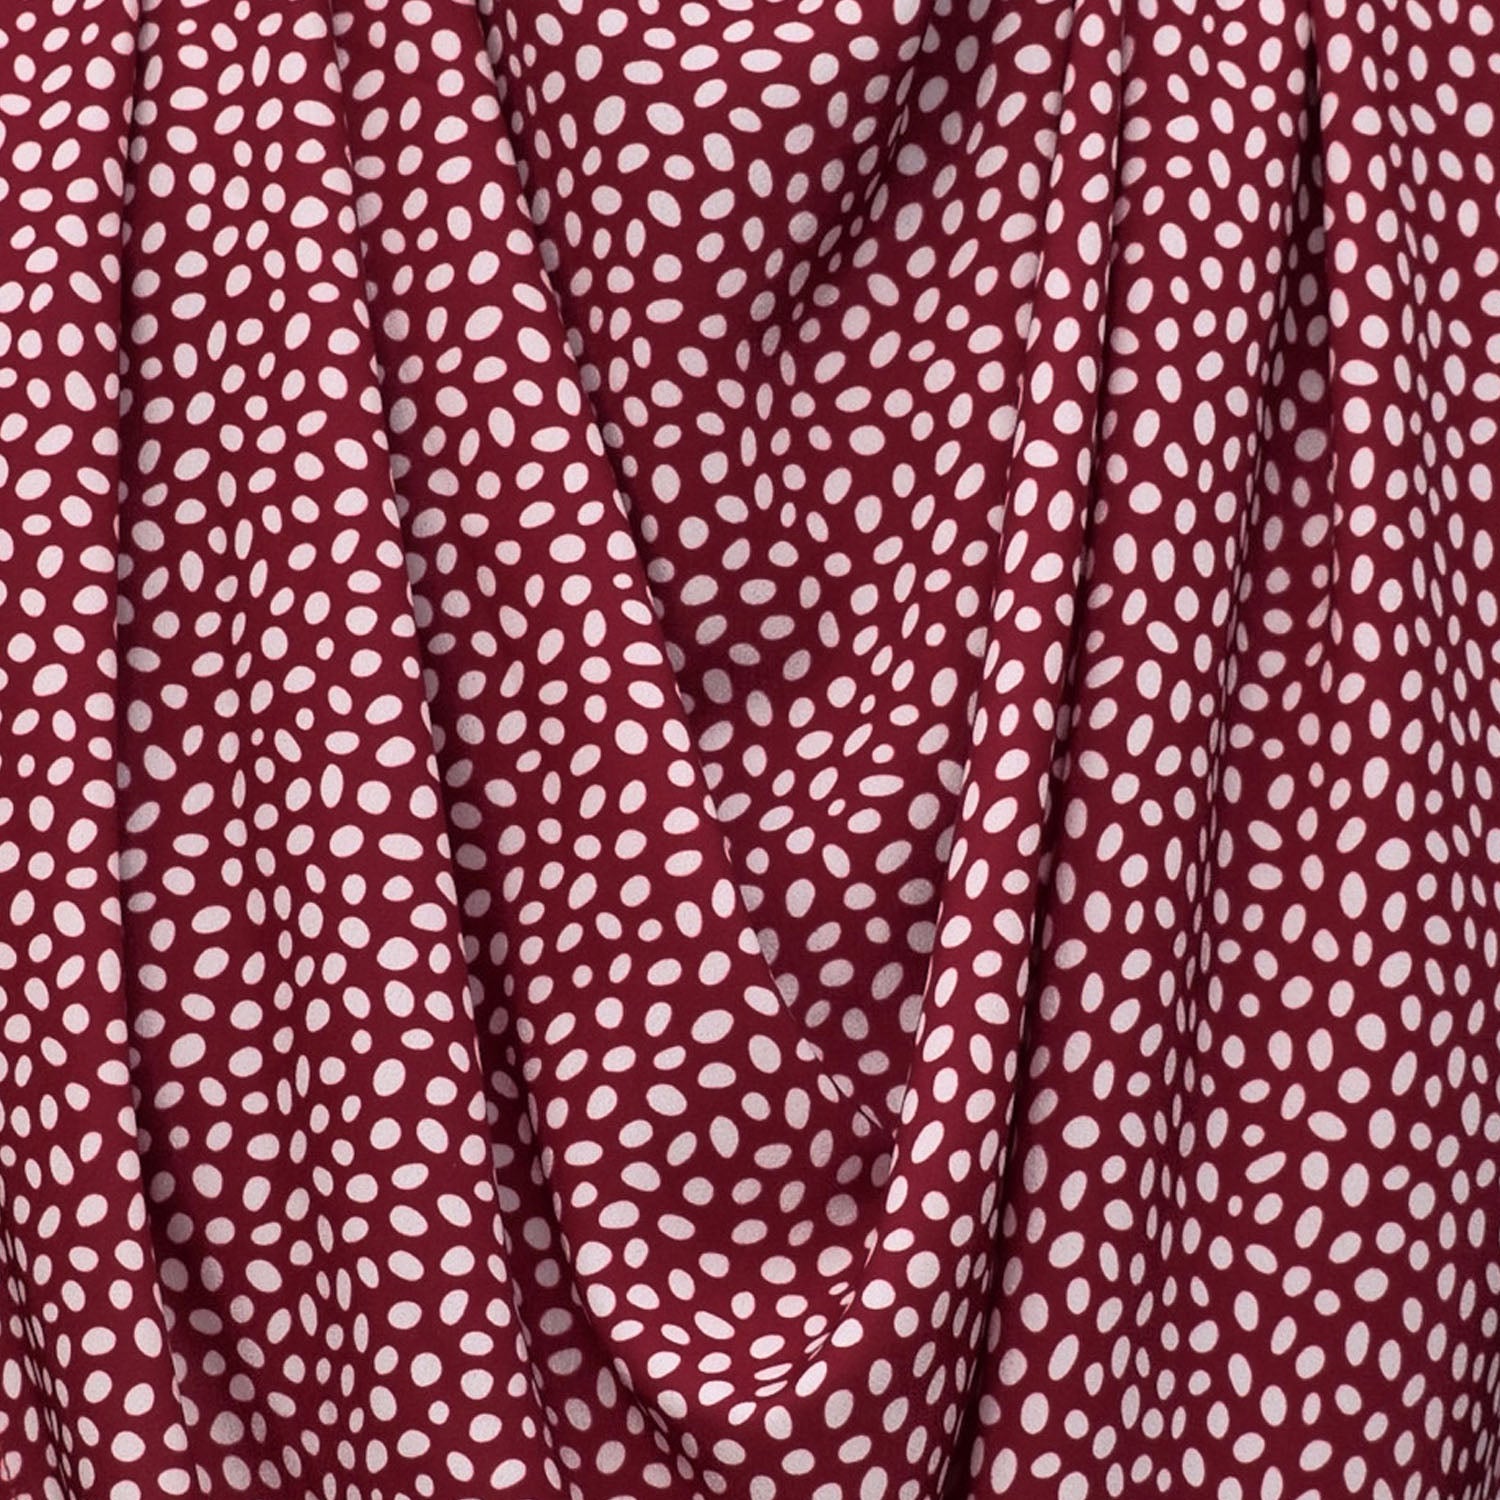 Pashmina scarf style clothing protector - Burgundy Dot | Health Care | Care Designs